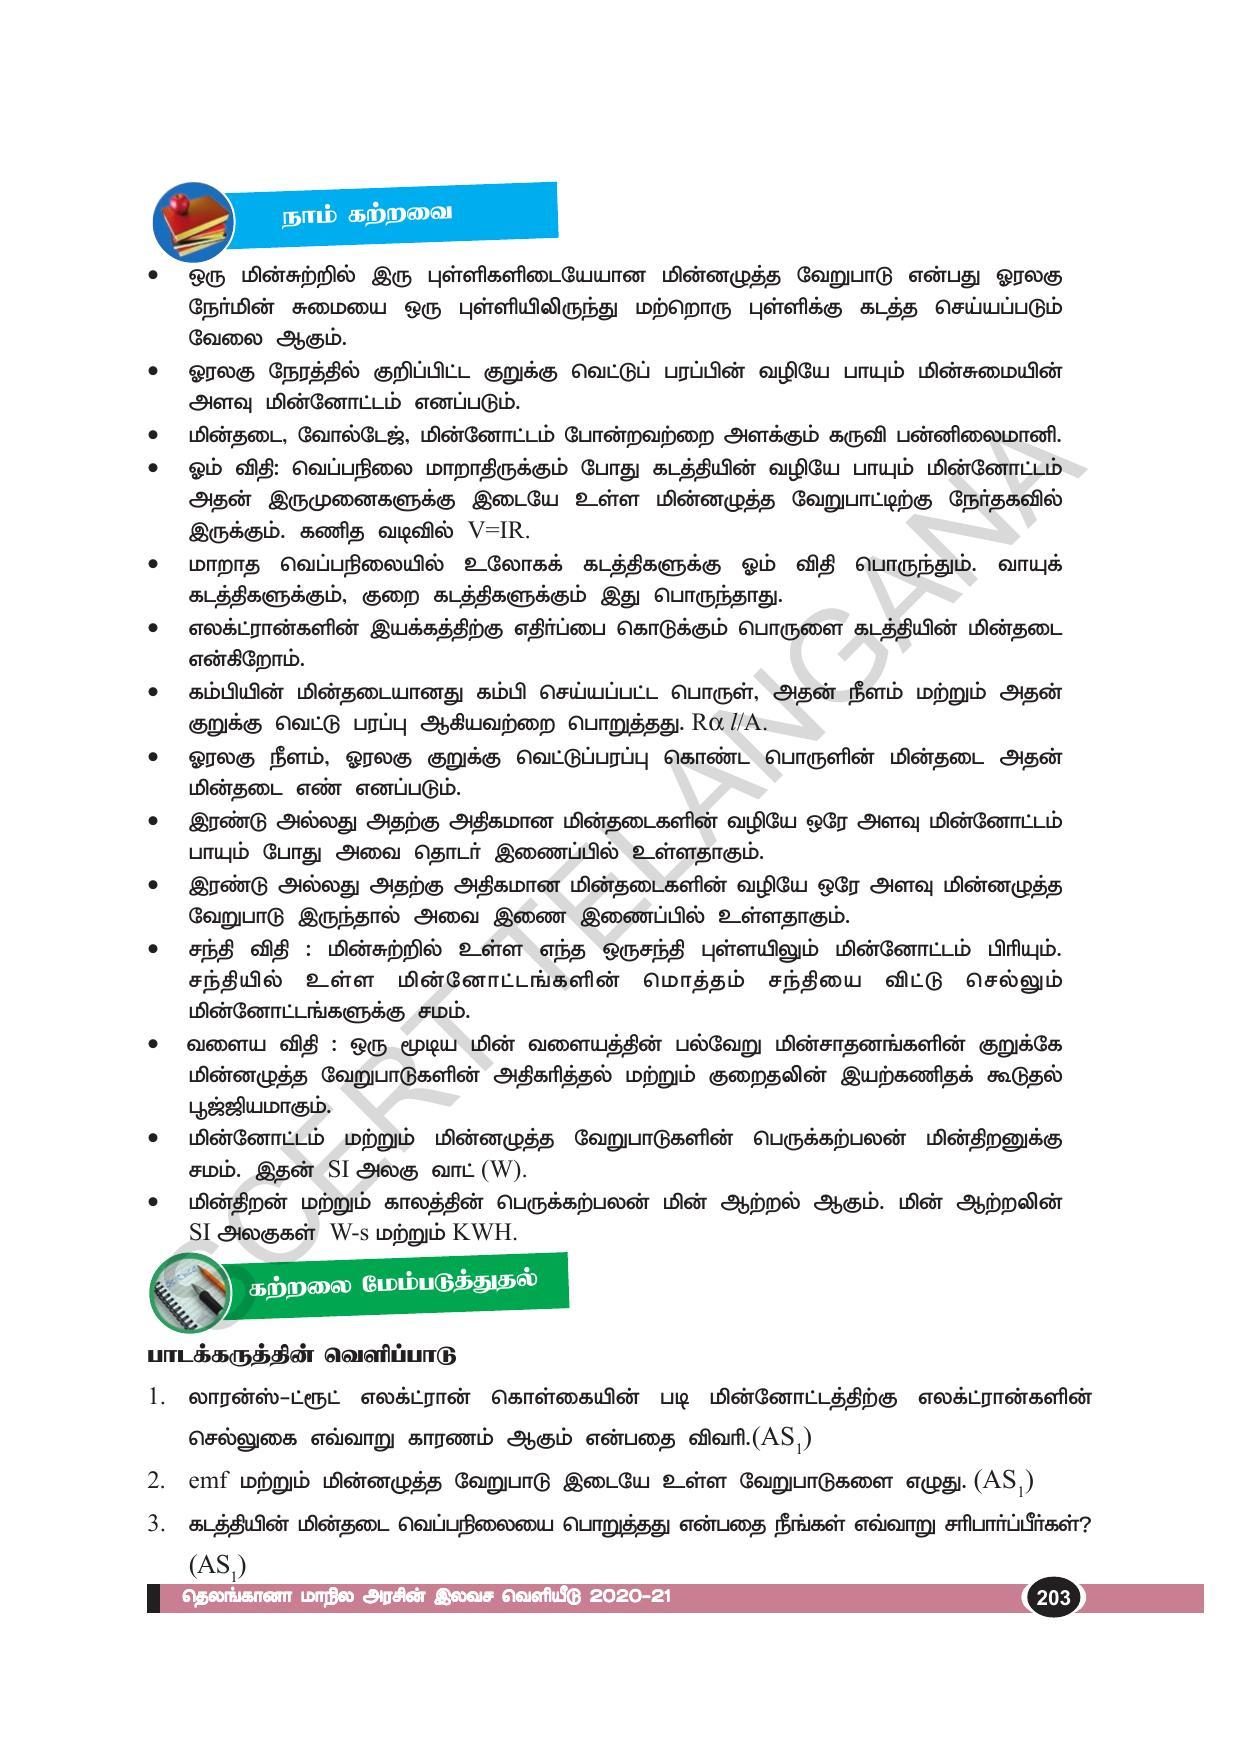 TS SCERT Class 10 Physical Science(Tamil Medium) Text Book - Page 215